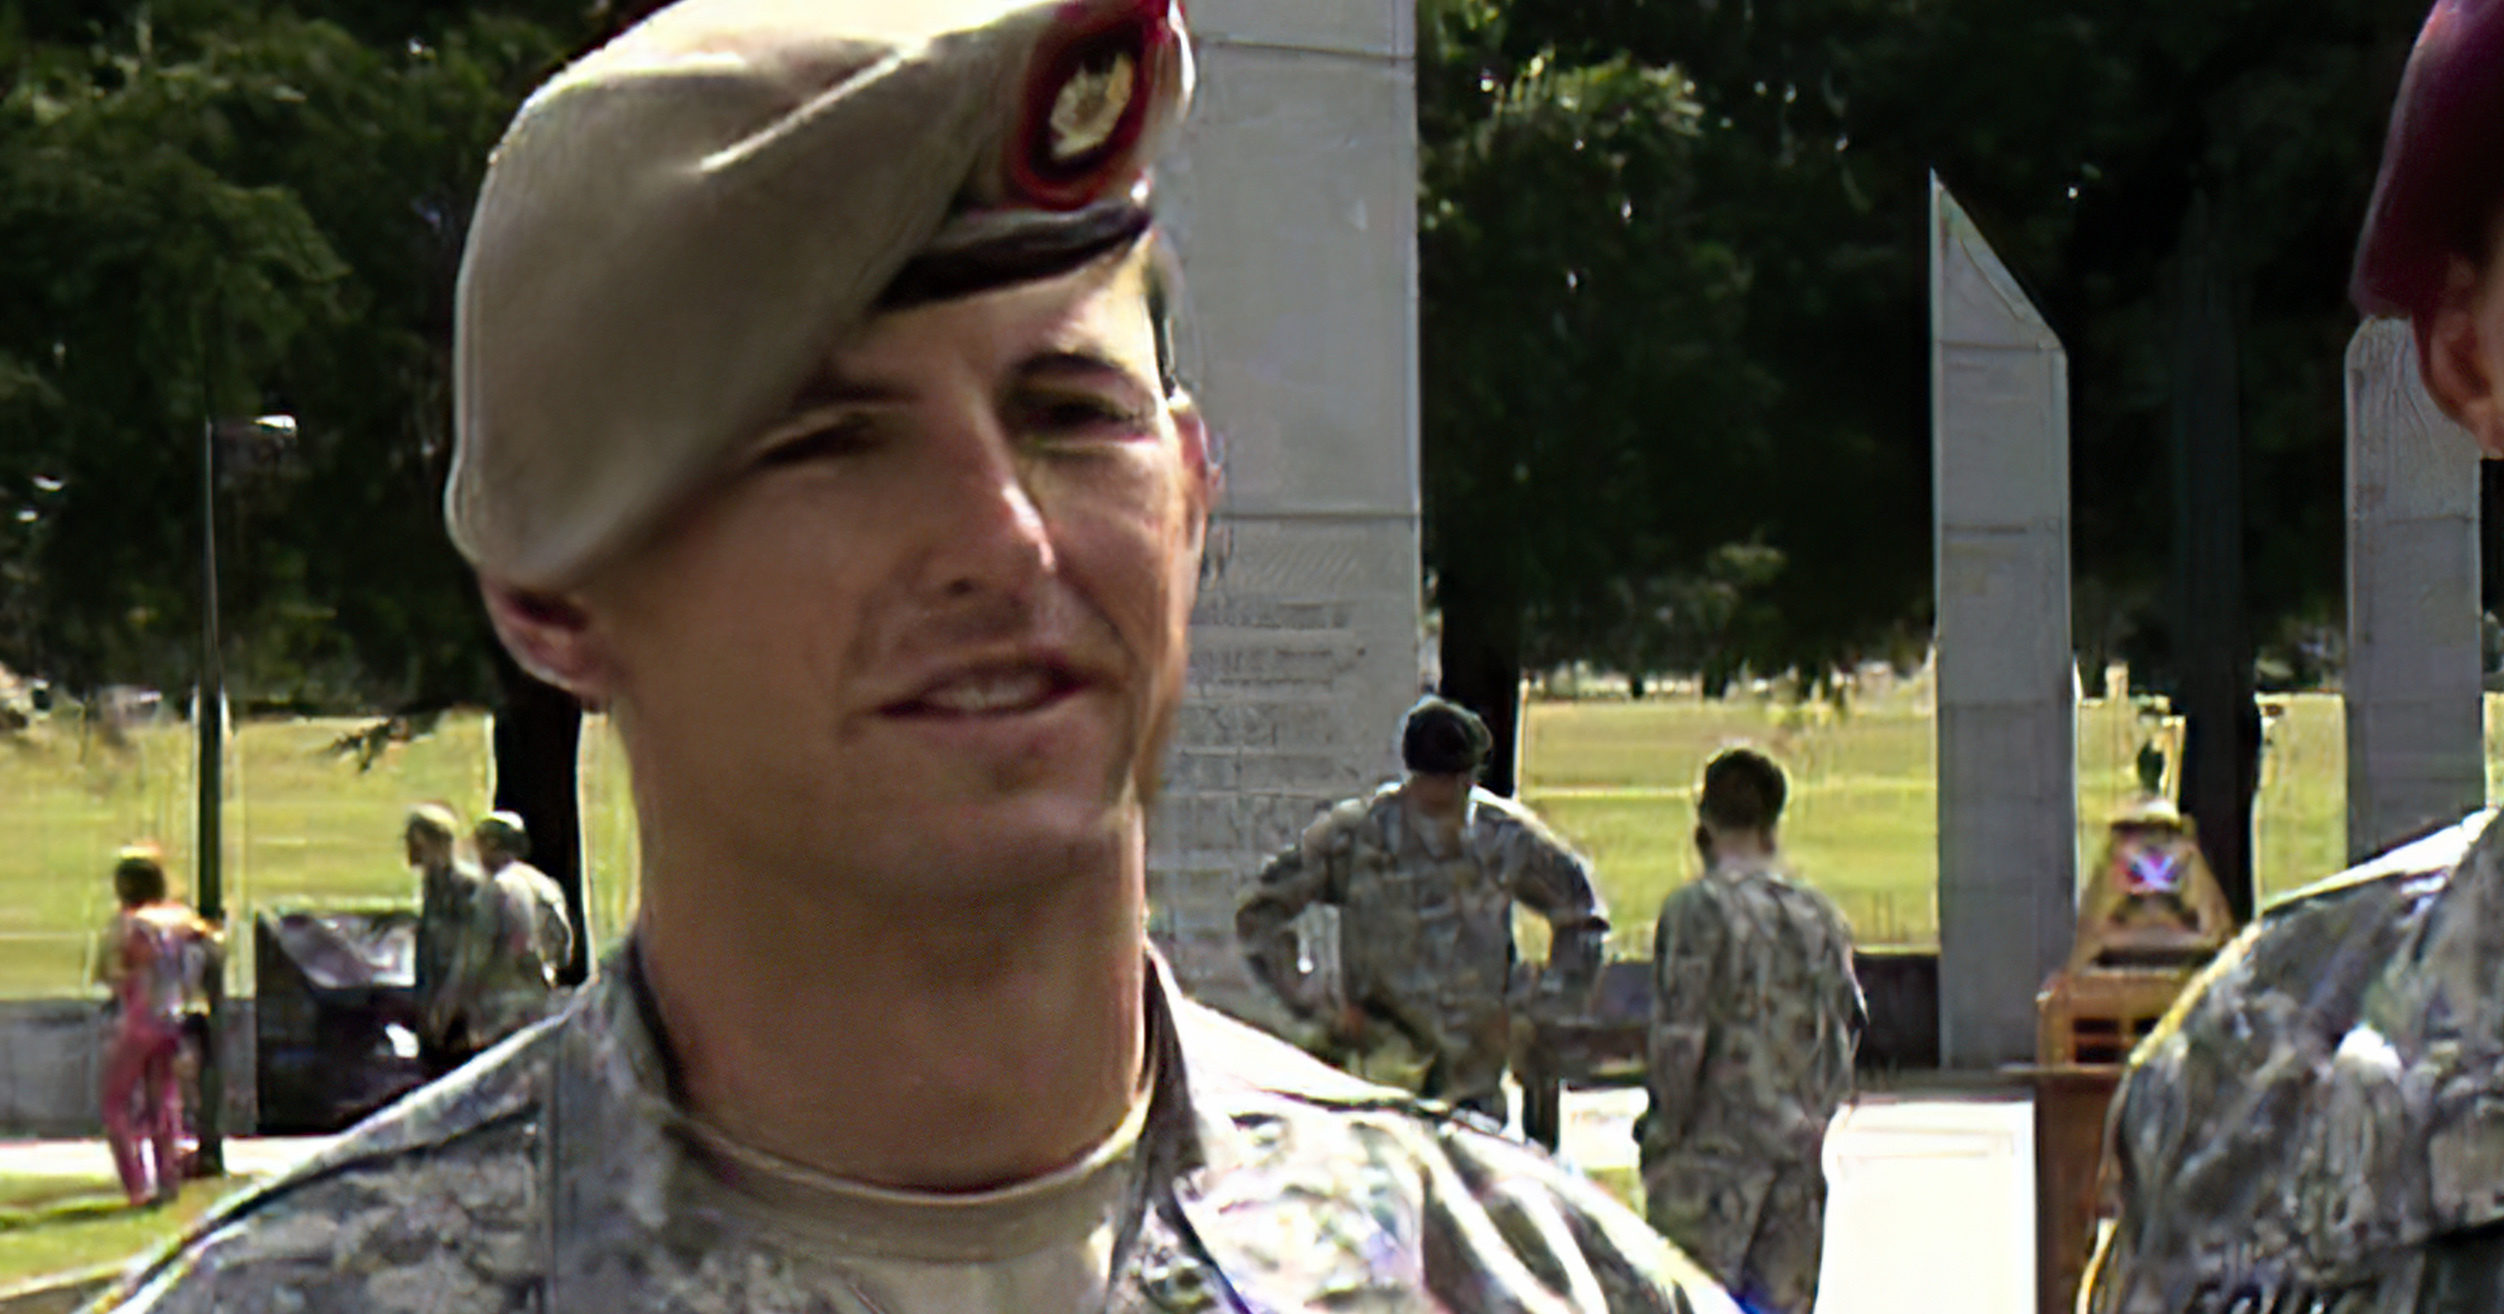 In this image from video provided by the US Army, then-Sgt. 1st Class Thomas Payne is interviewed as a winner of the 2012 Best Ranger competition at Fort Benning, Georgia, on April 16, 2012. Payne will receive the Medal of Honor, the US military’s highest honor for valor in combat, for rescuing about 70 hostages who were set to be executed by ISIS militants in Iraq in 2015. Sgt. Maj. Payne will receive the honor in a White House ceremony on the 19th anniversary of the Sept. 11, 2001, terrorist attacks.